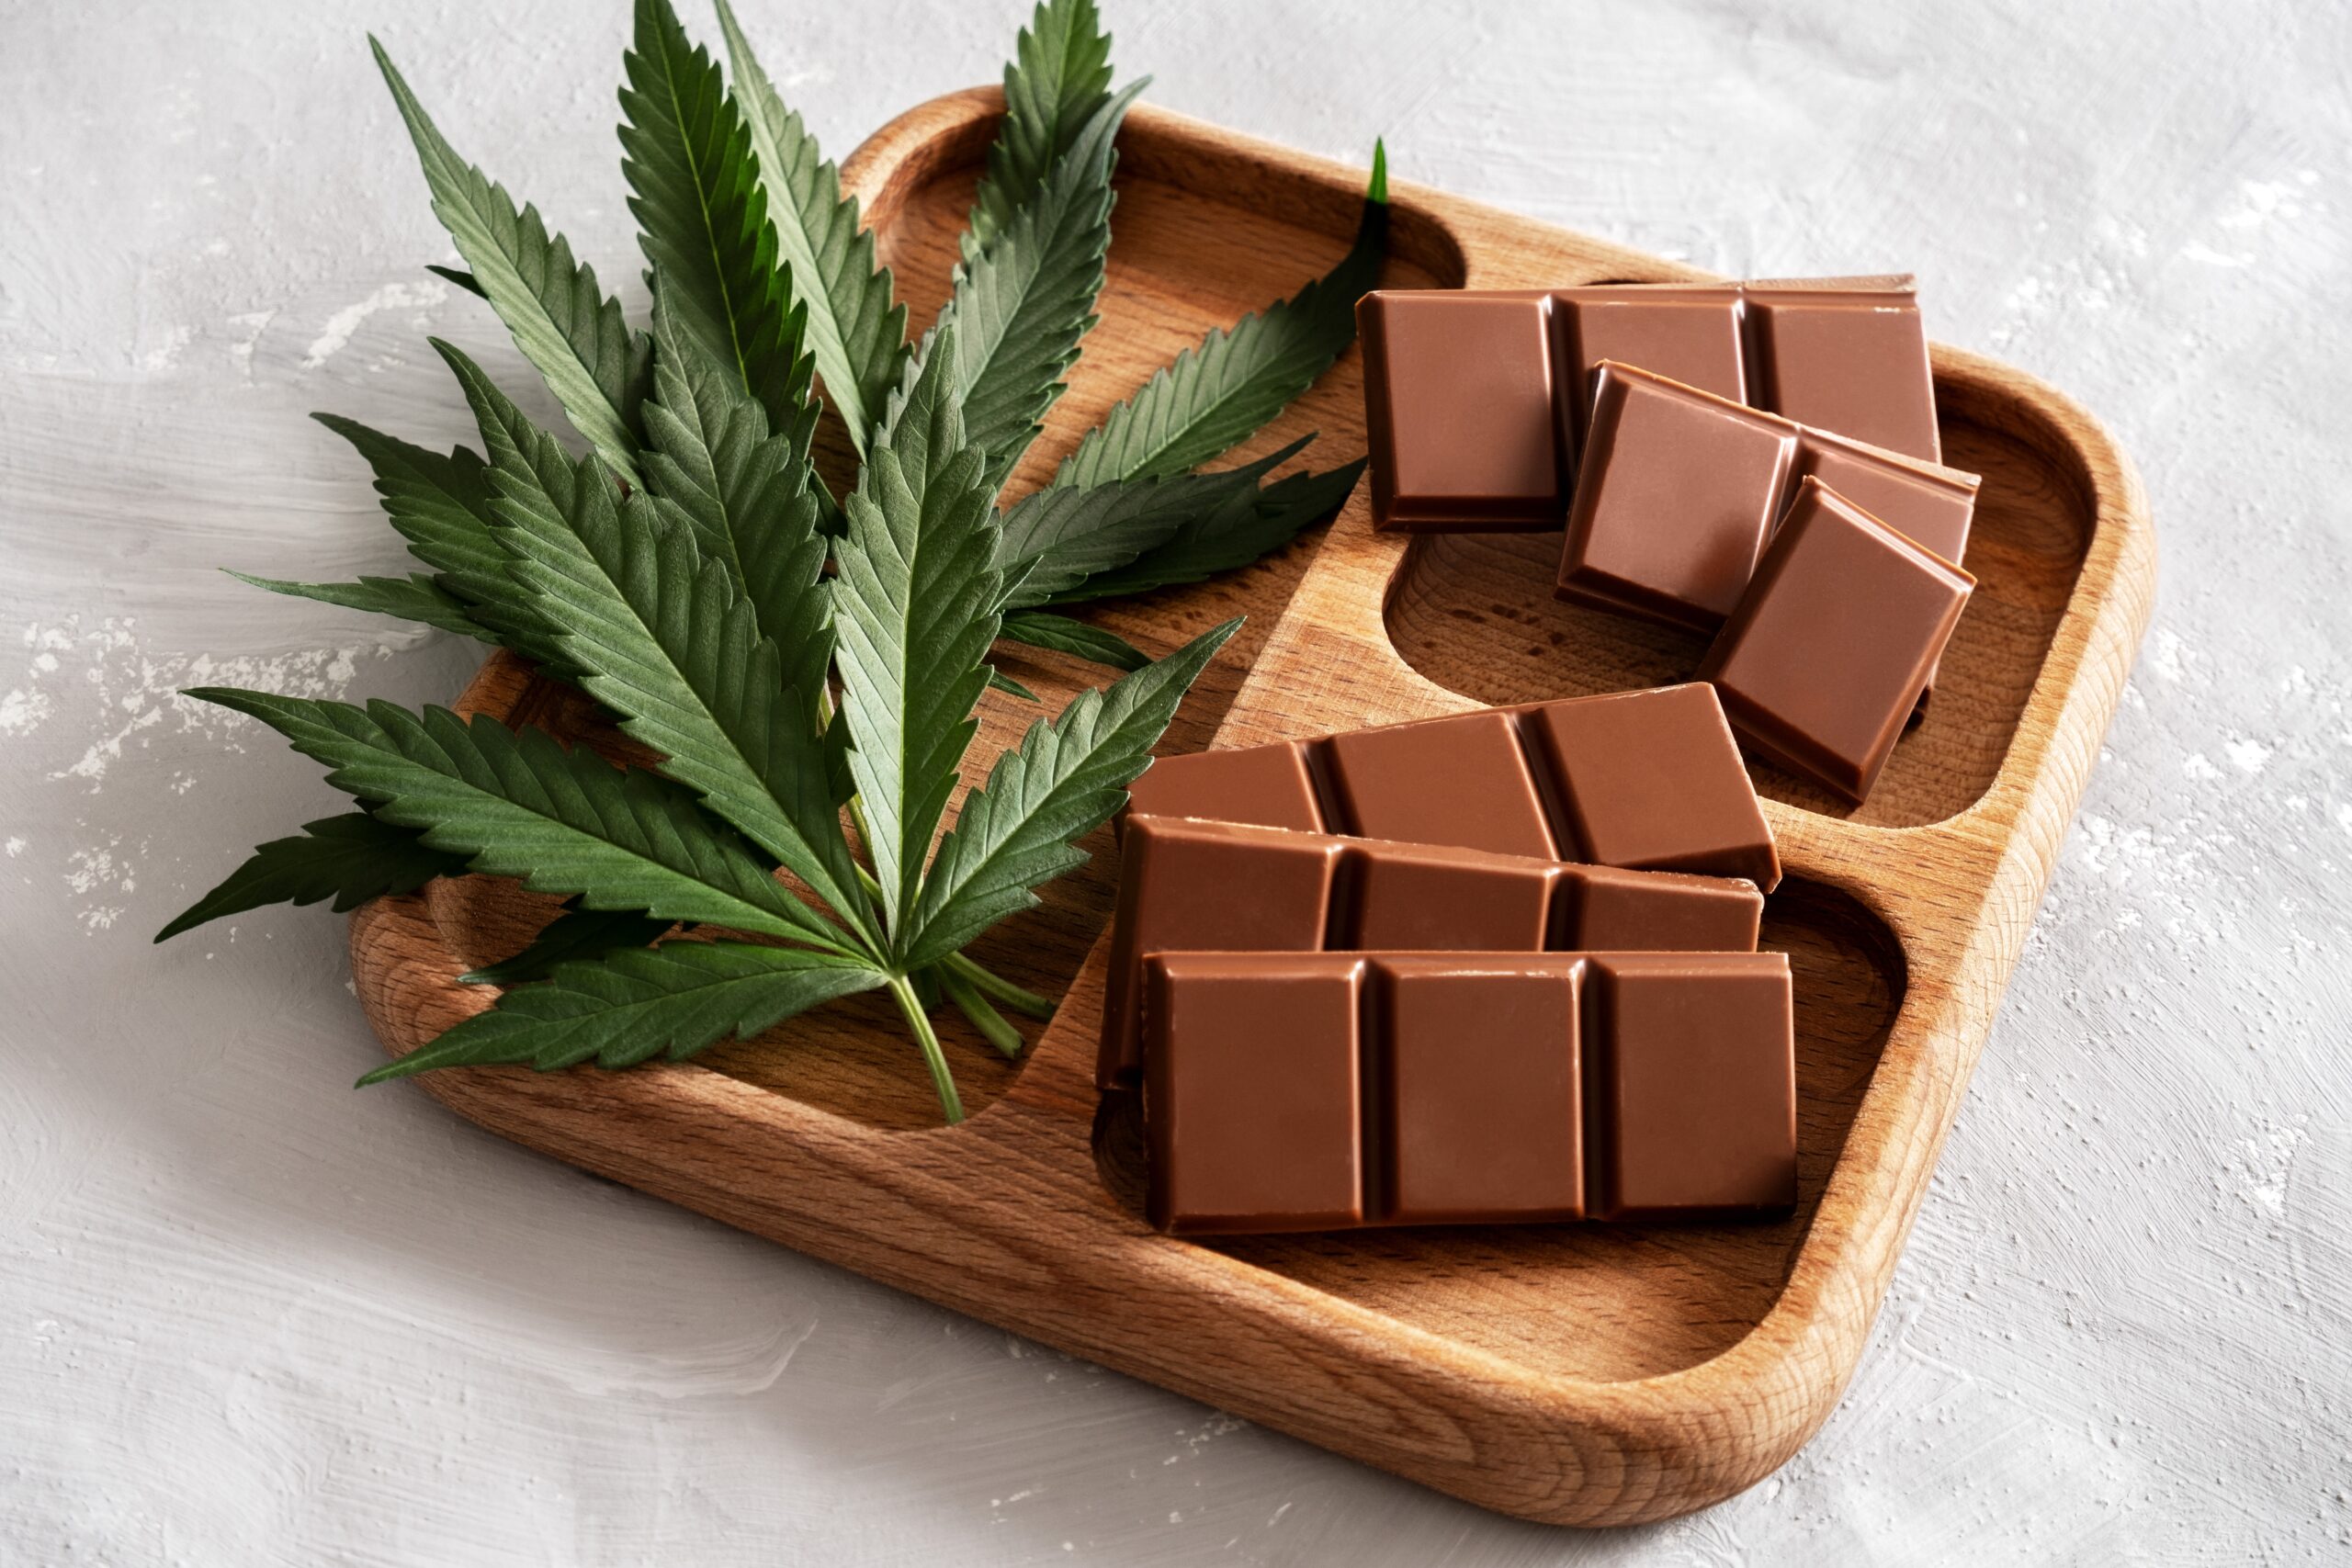 Weed with chocolate